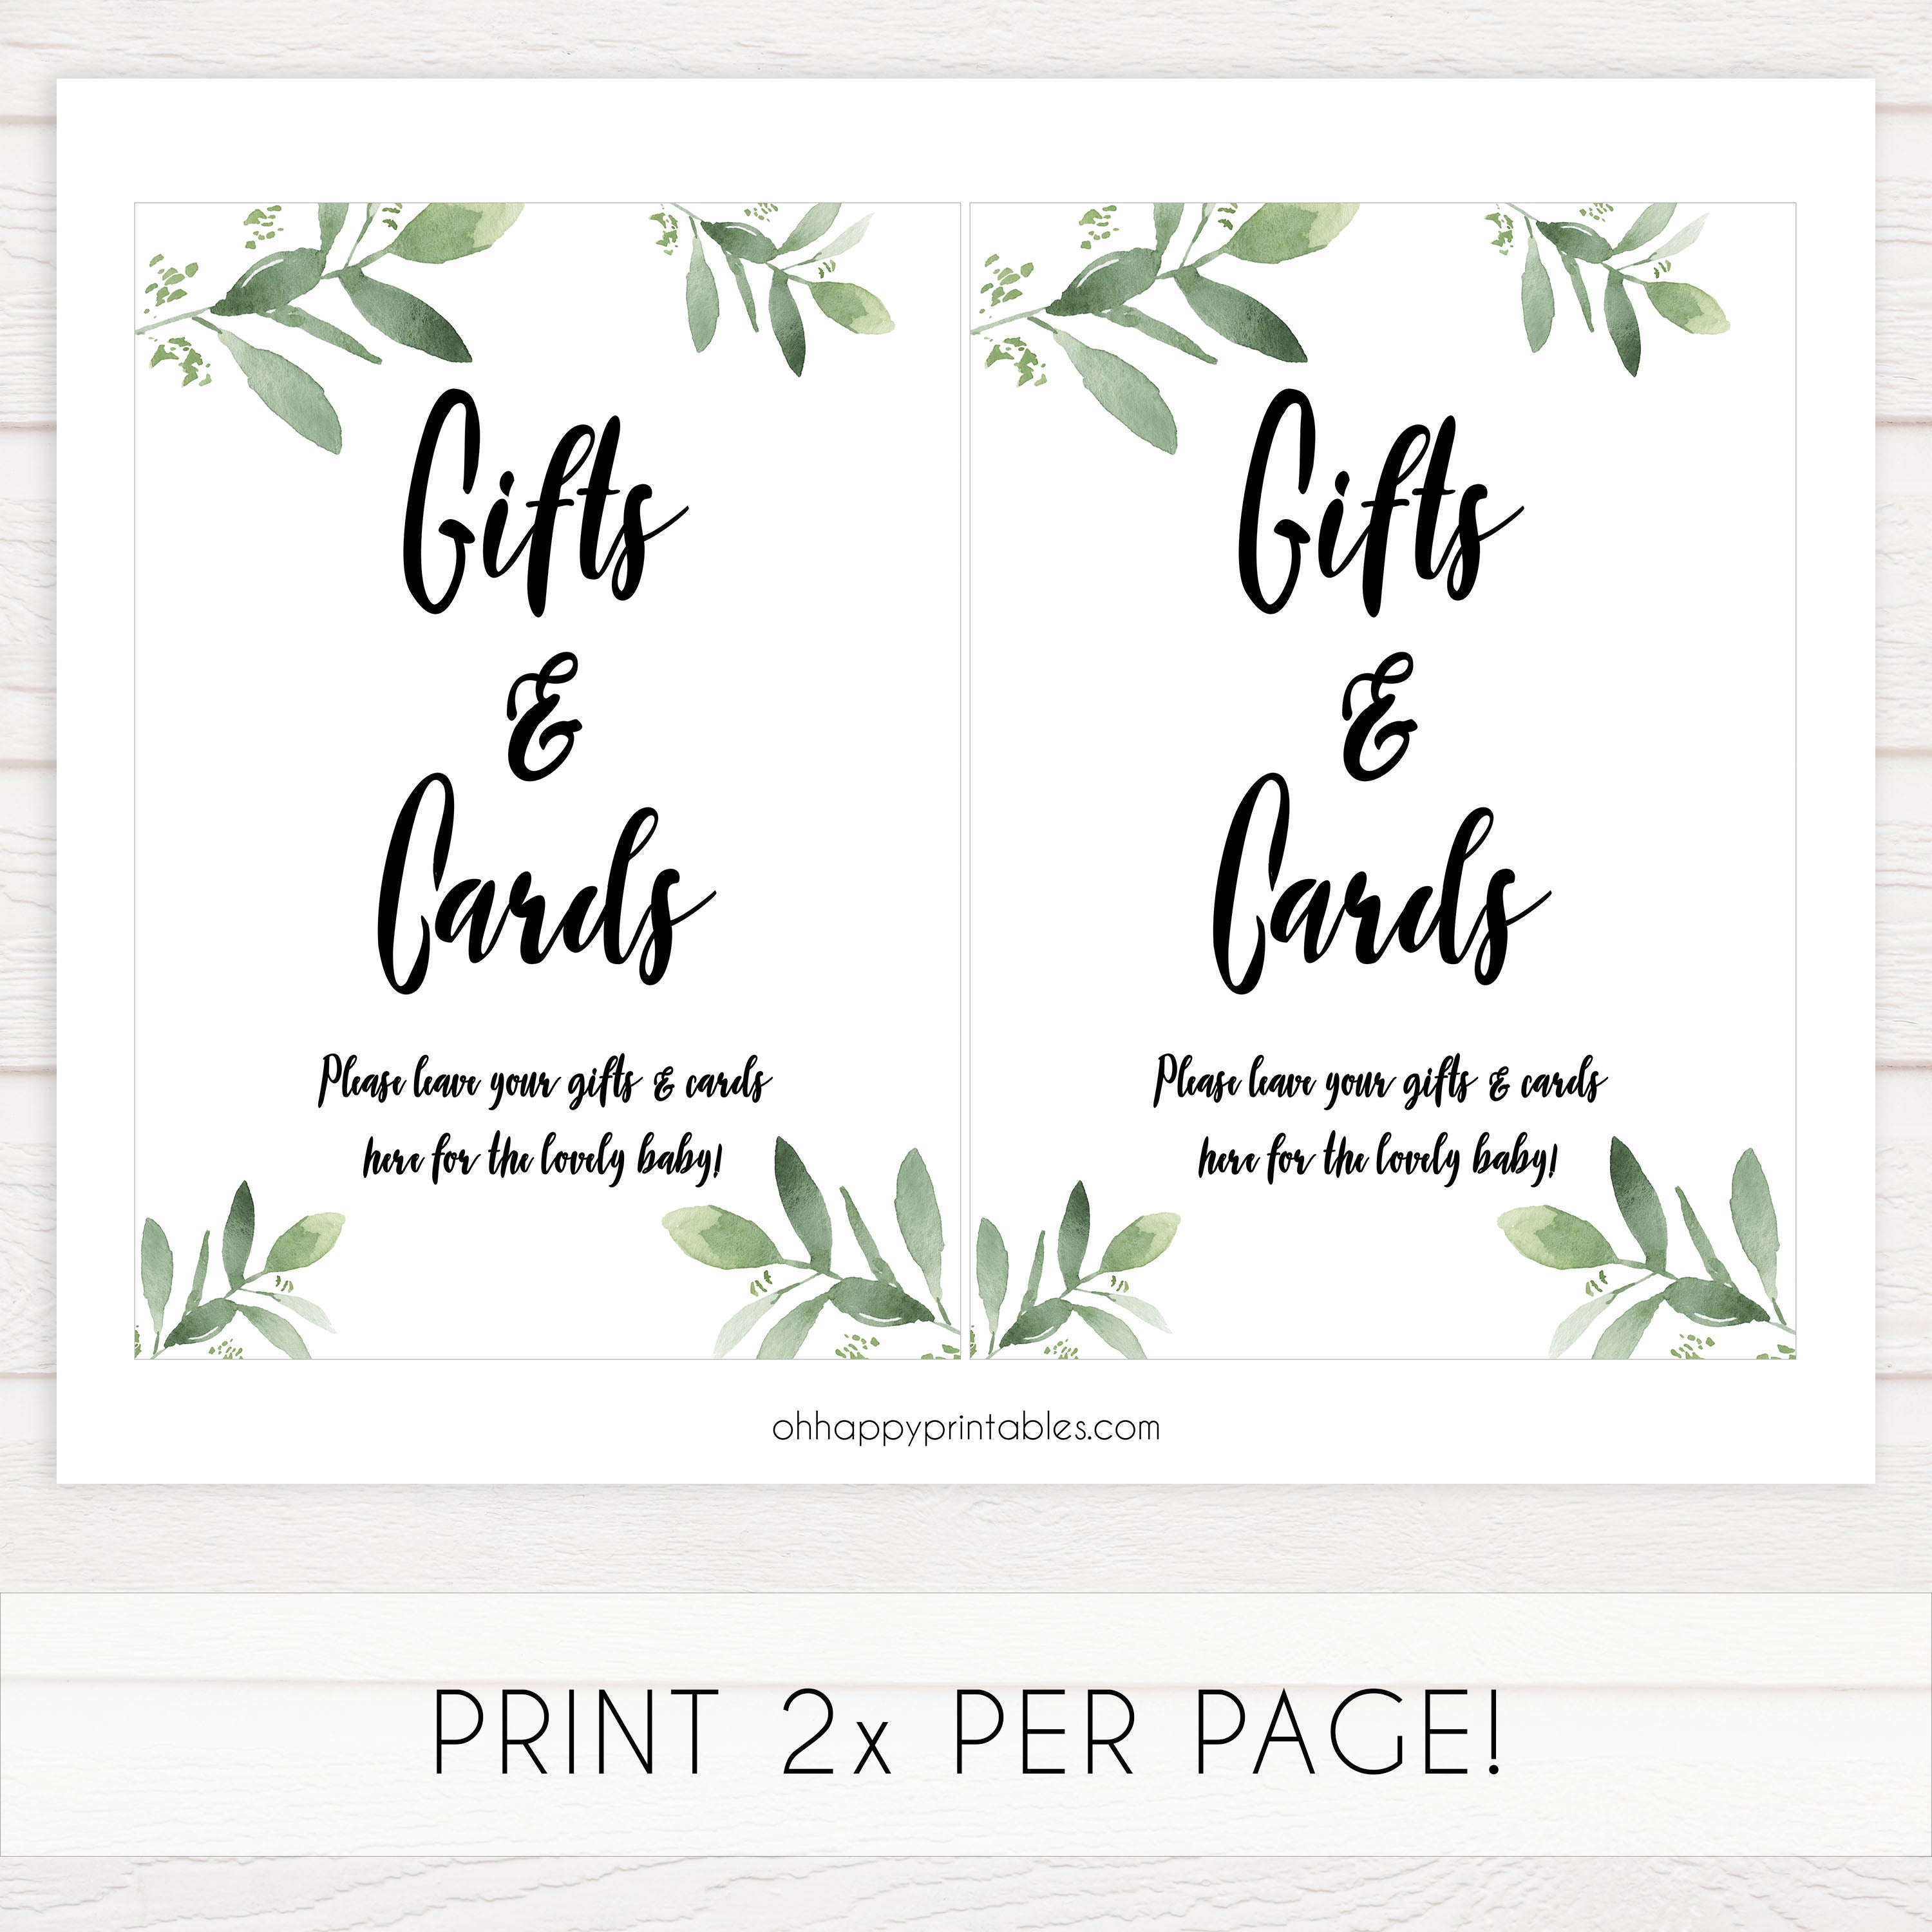 gifts and cards baby shower signs, printable baby shower signs, botanical baby shower decor, floral baby table signs